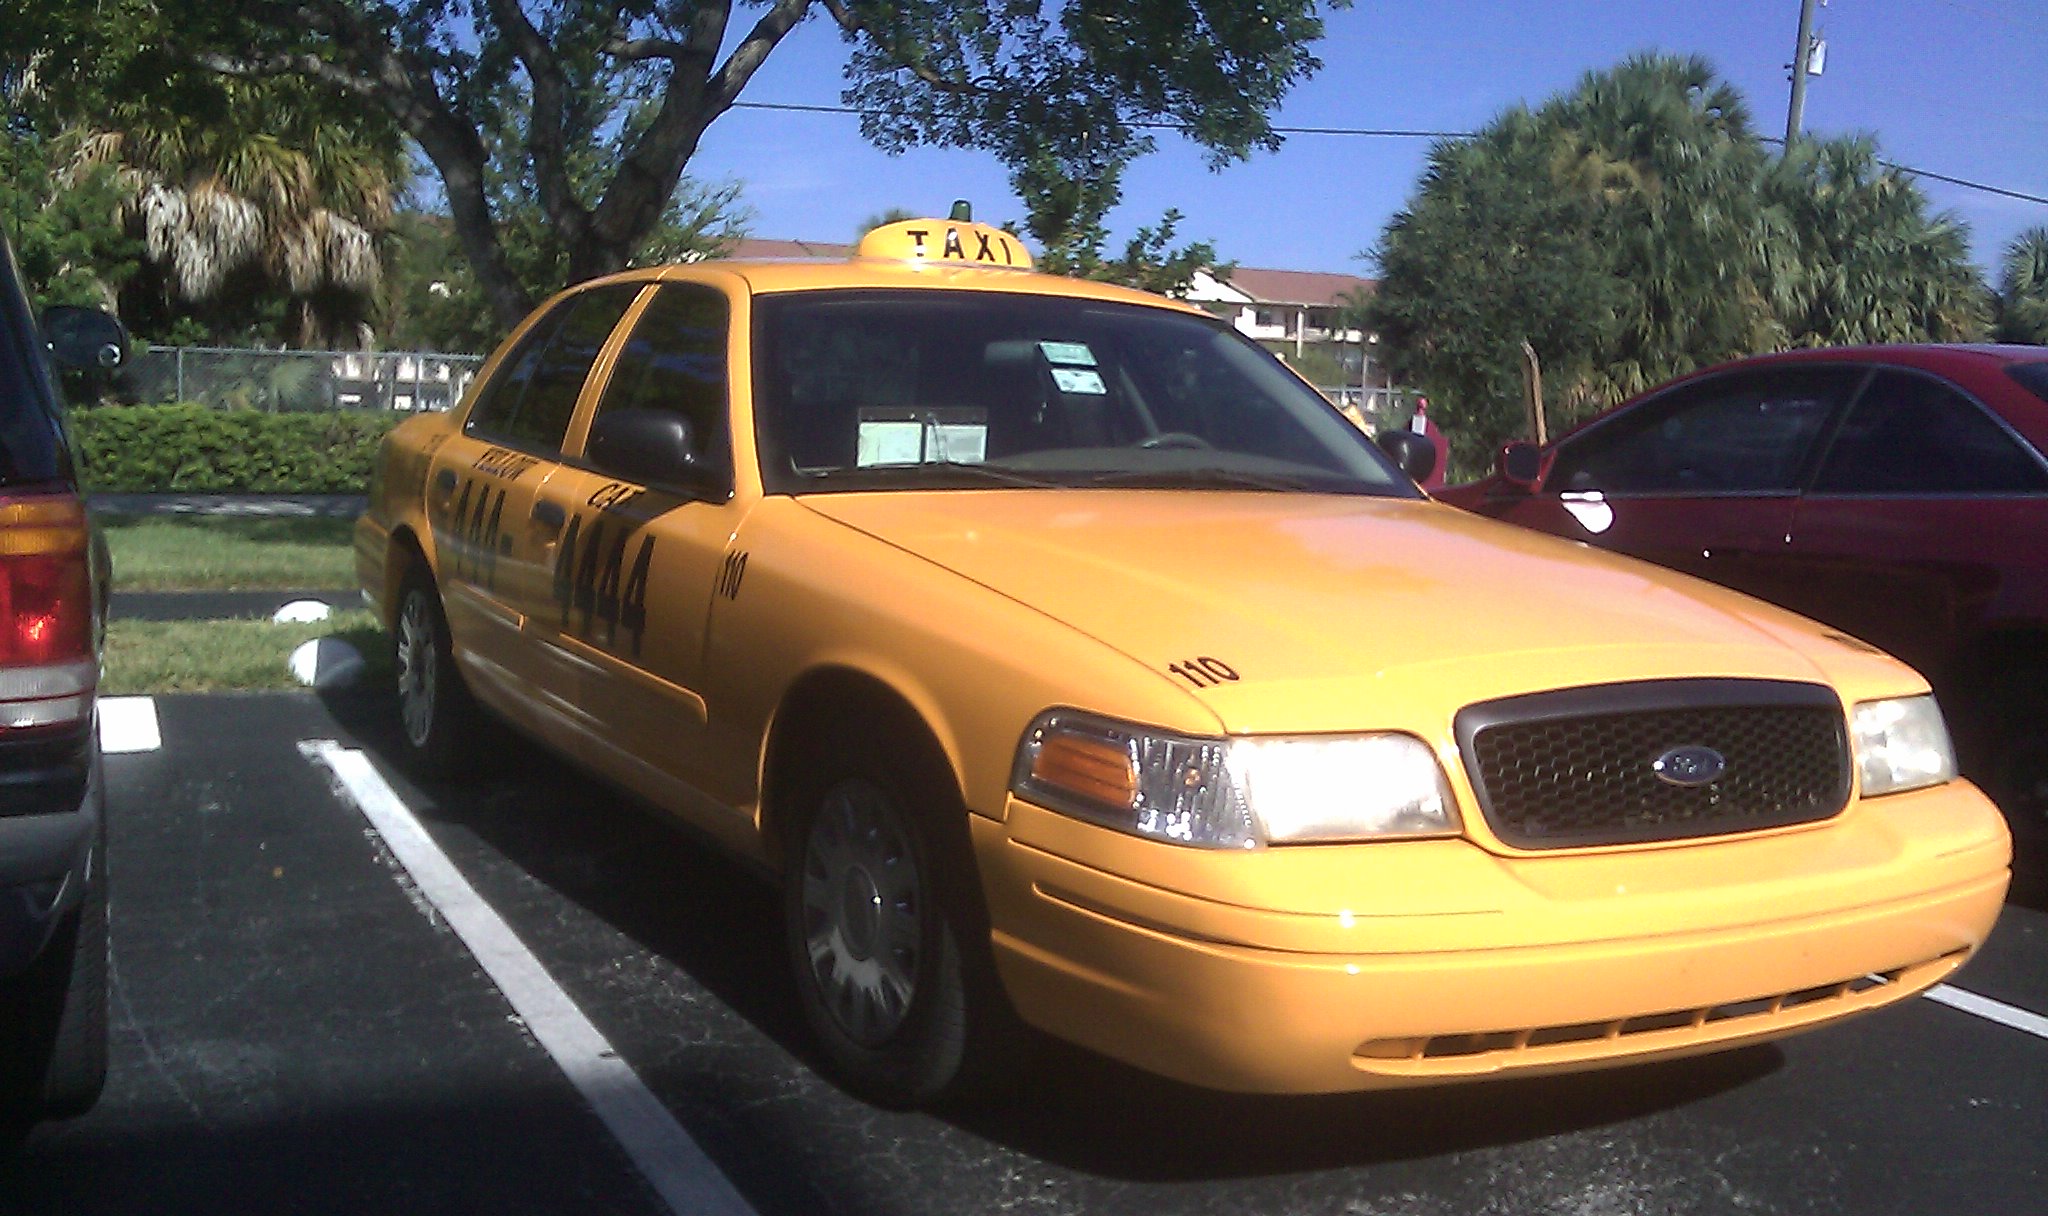 8am close up....YUP...its a cab...in an assigned spot